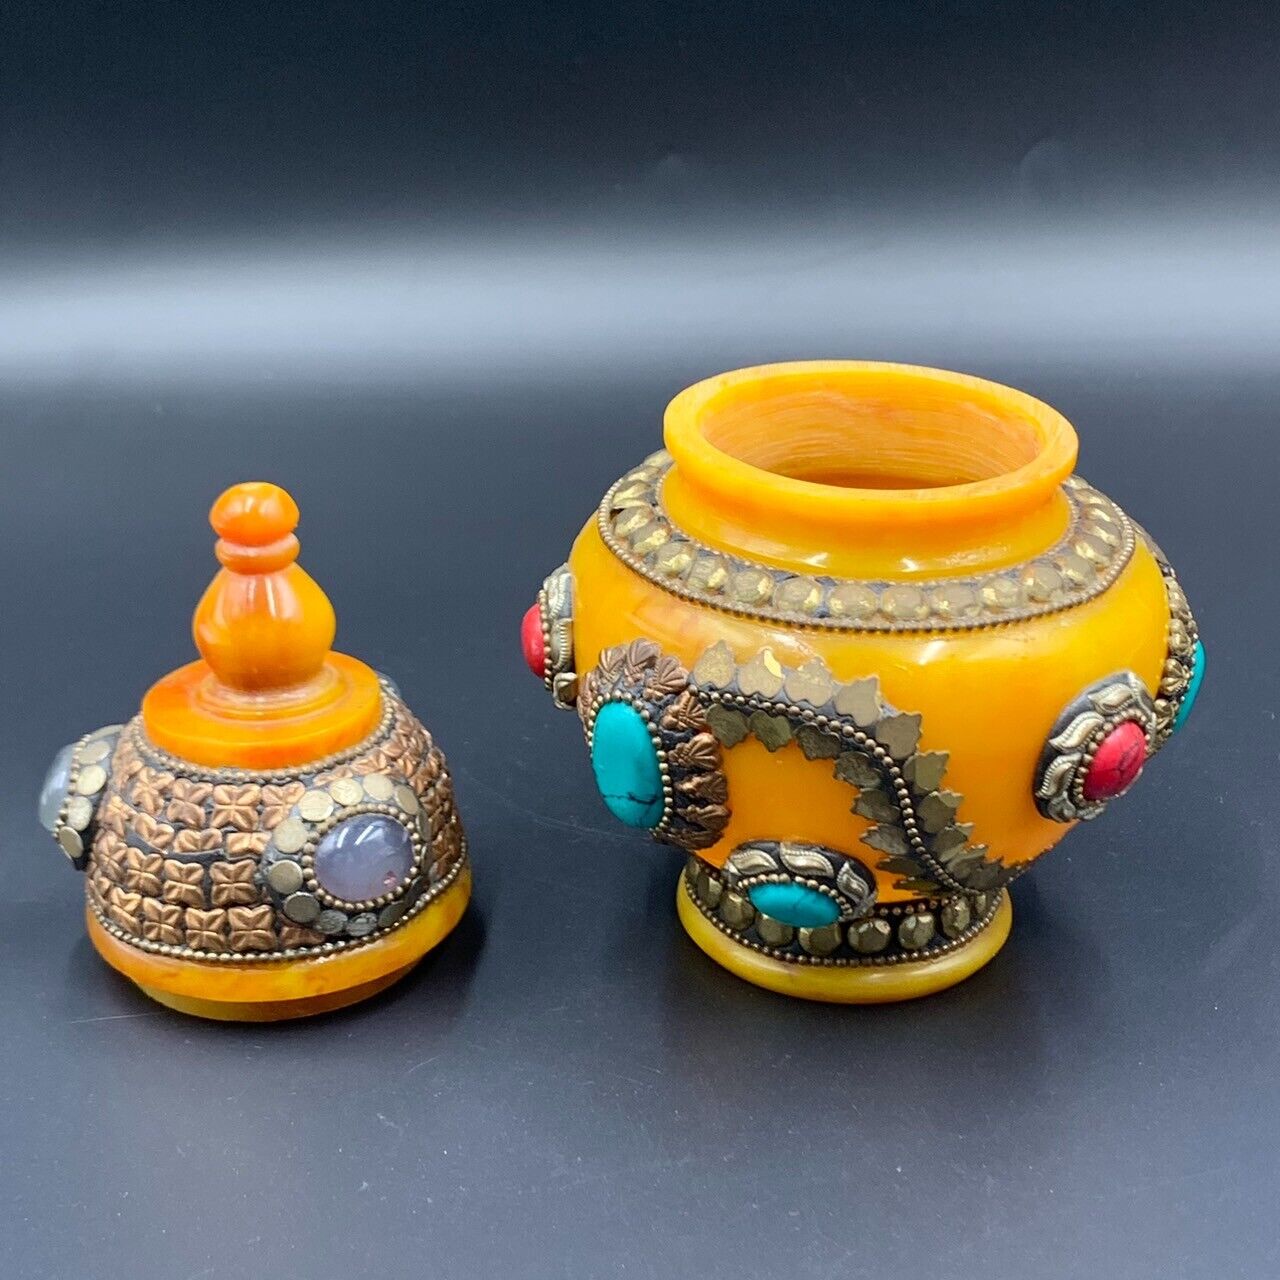 Vintage Handmade Old Nepalese Amber Jewel Jar With Agate Stones, Collectible - Image 3 of 5